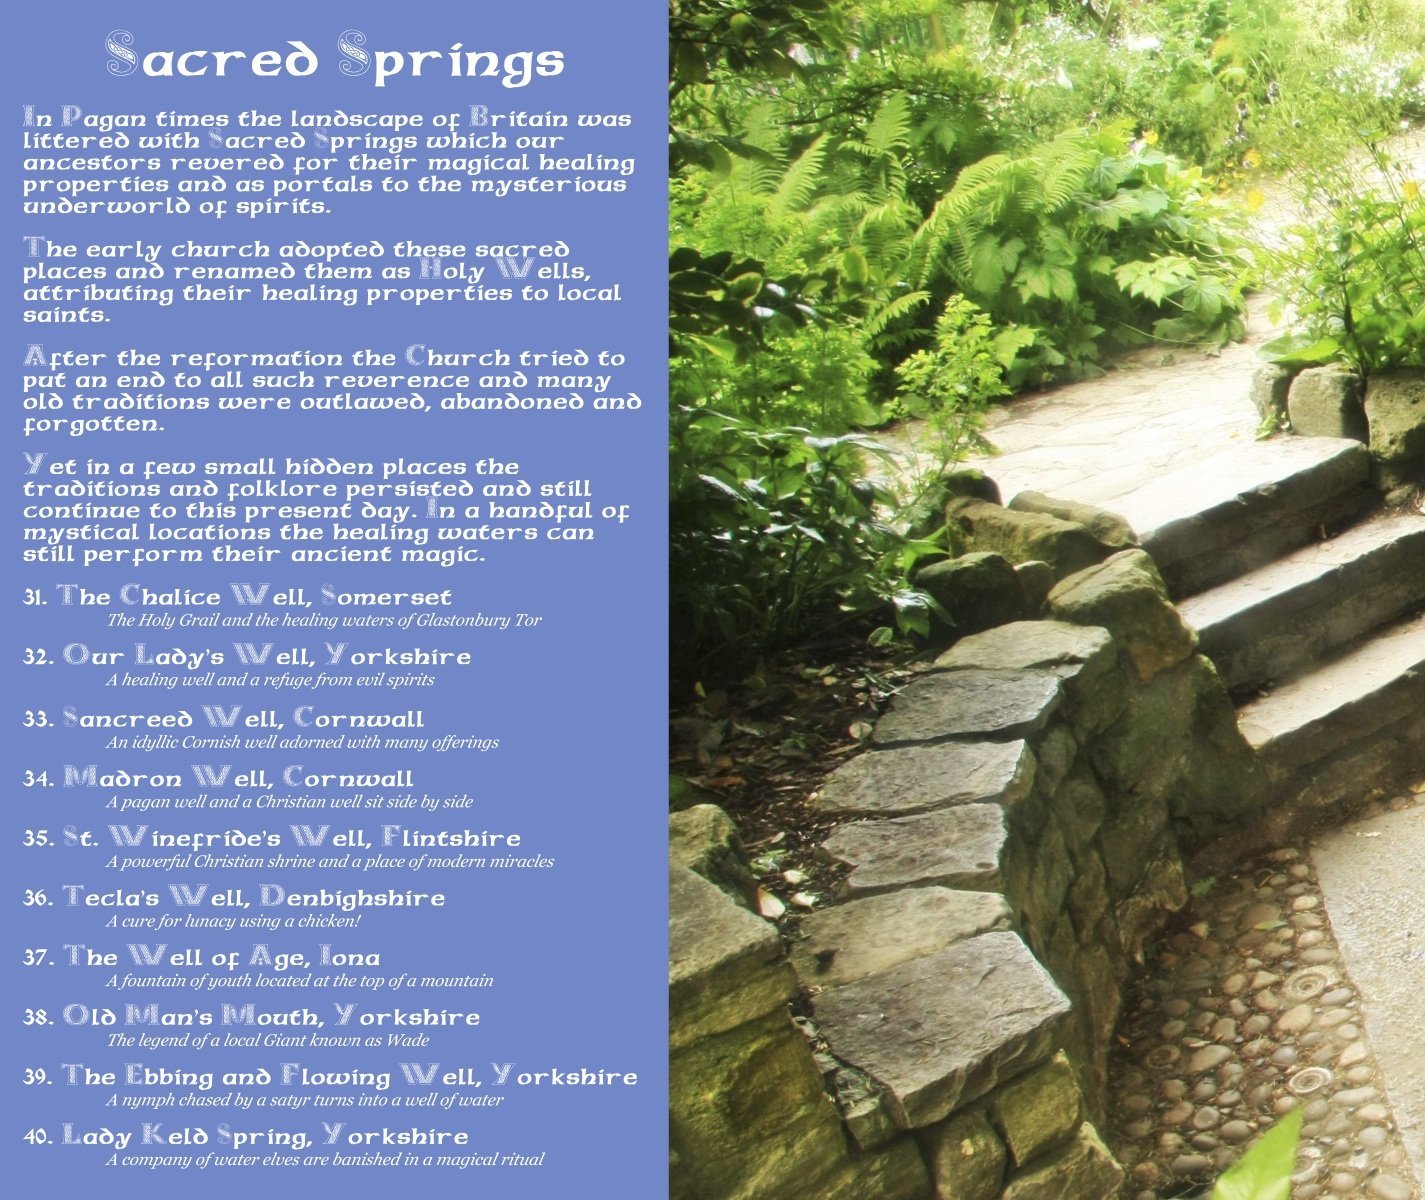 Magical Places Of Britain Book - Sacred Springs - Viking Dragon Books